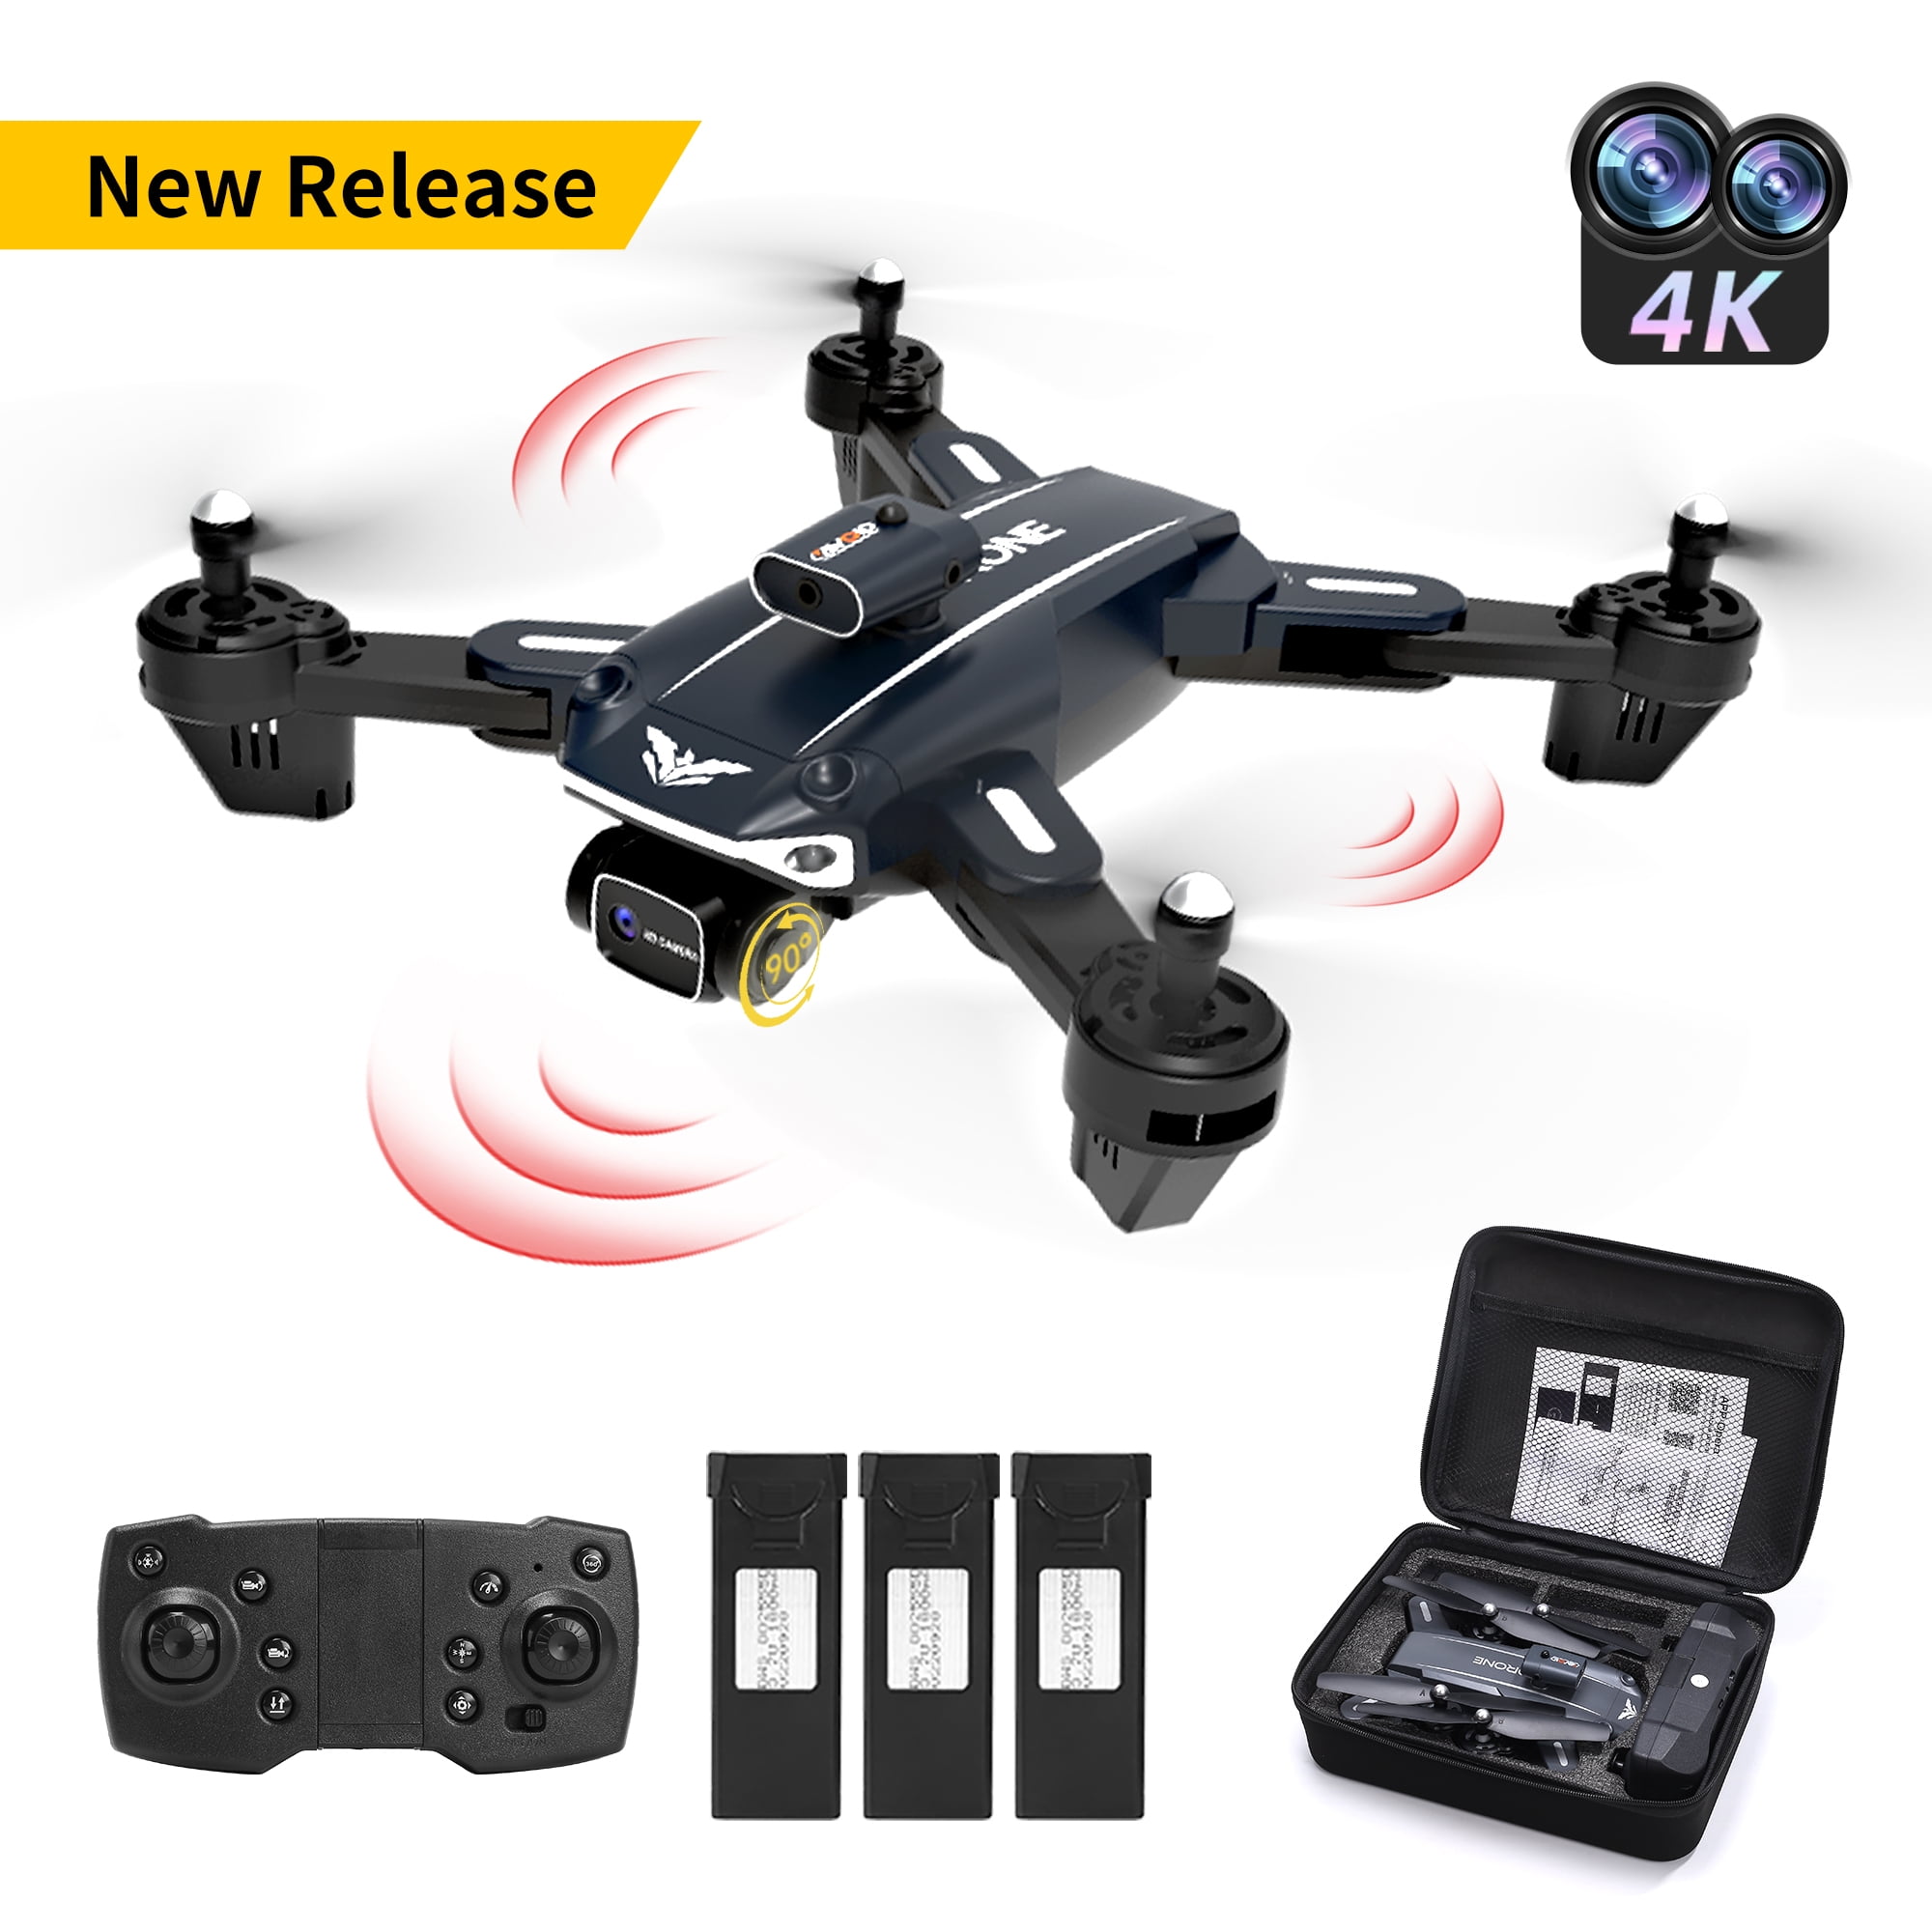 RC Drone with 4K HD Dual Camera for Kids FPV RC Quadcopter Intelligent 3 Sides Obstacle Avoidance,Great Gift Children Adults Play Indoor and Outdoor 3 Batteries,Black - Walmart.com